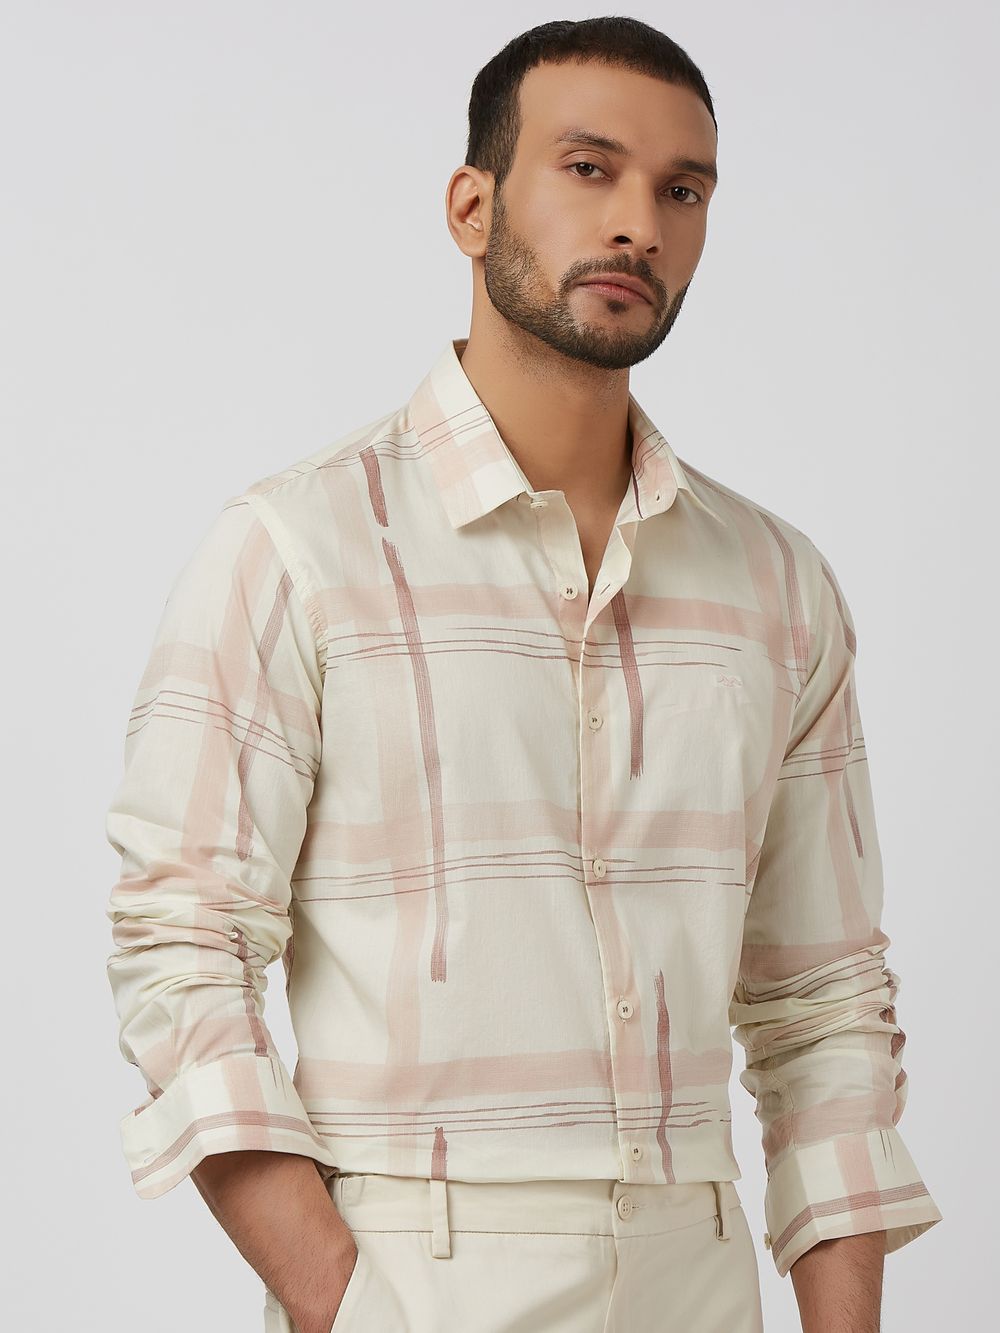 Off White Printed Check Slim Fit Casual Shirt